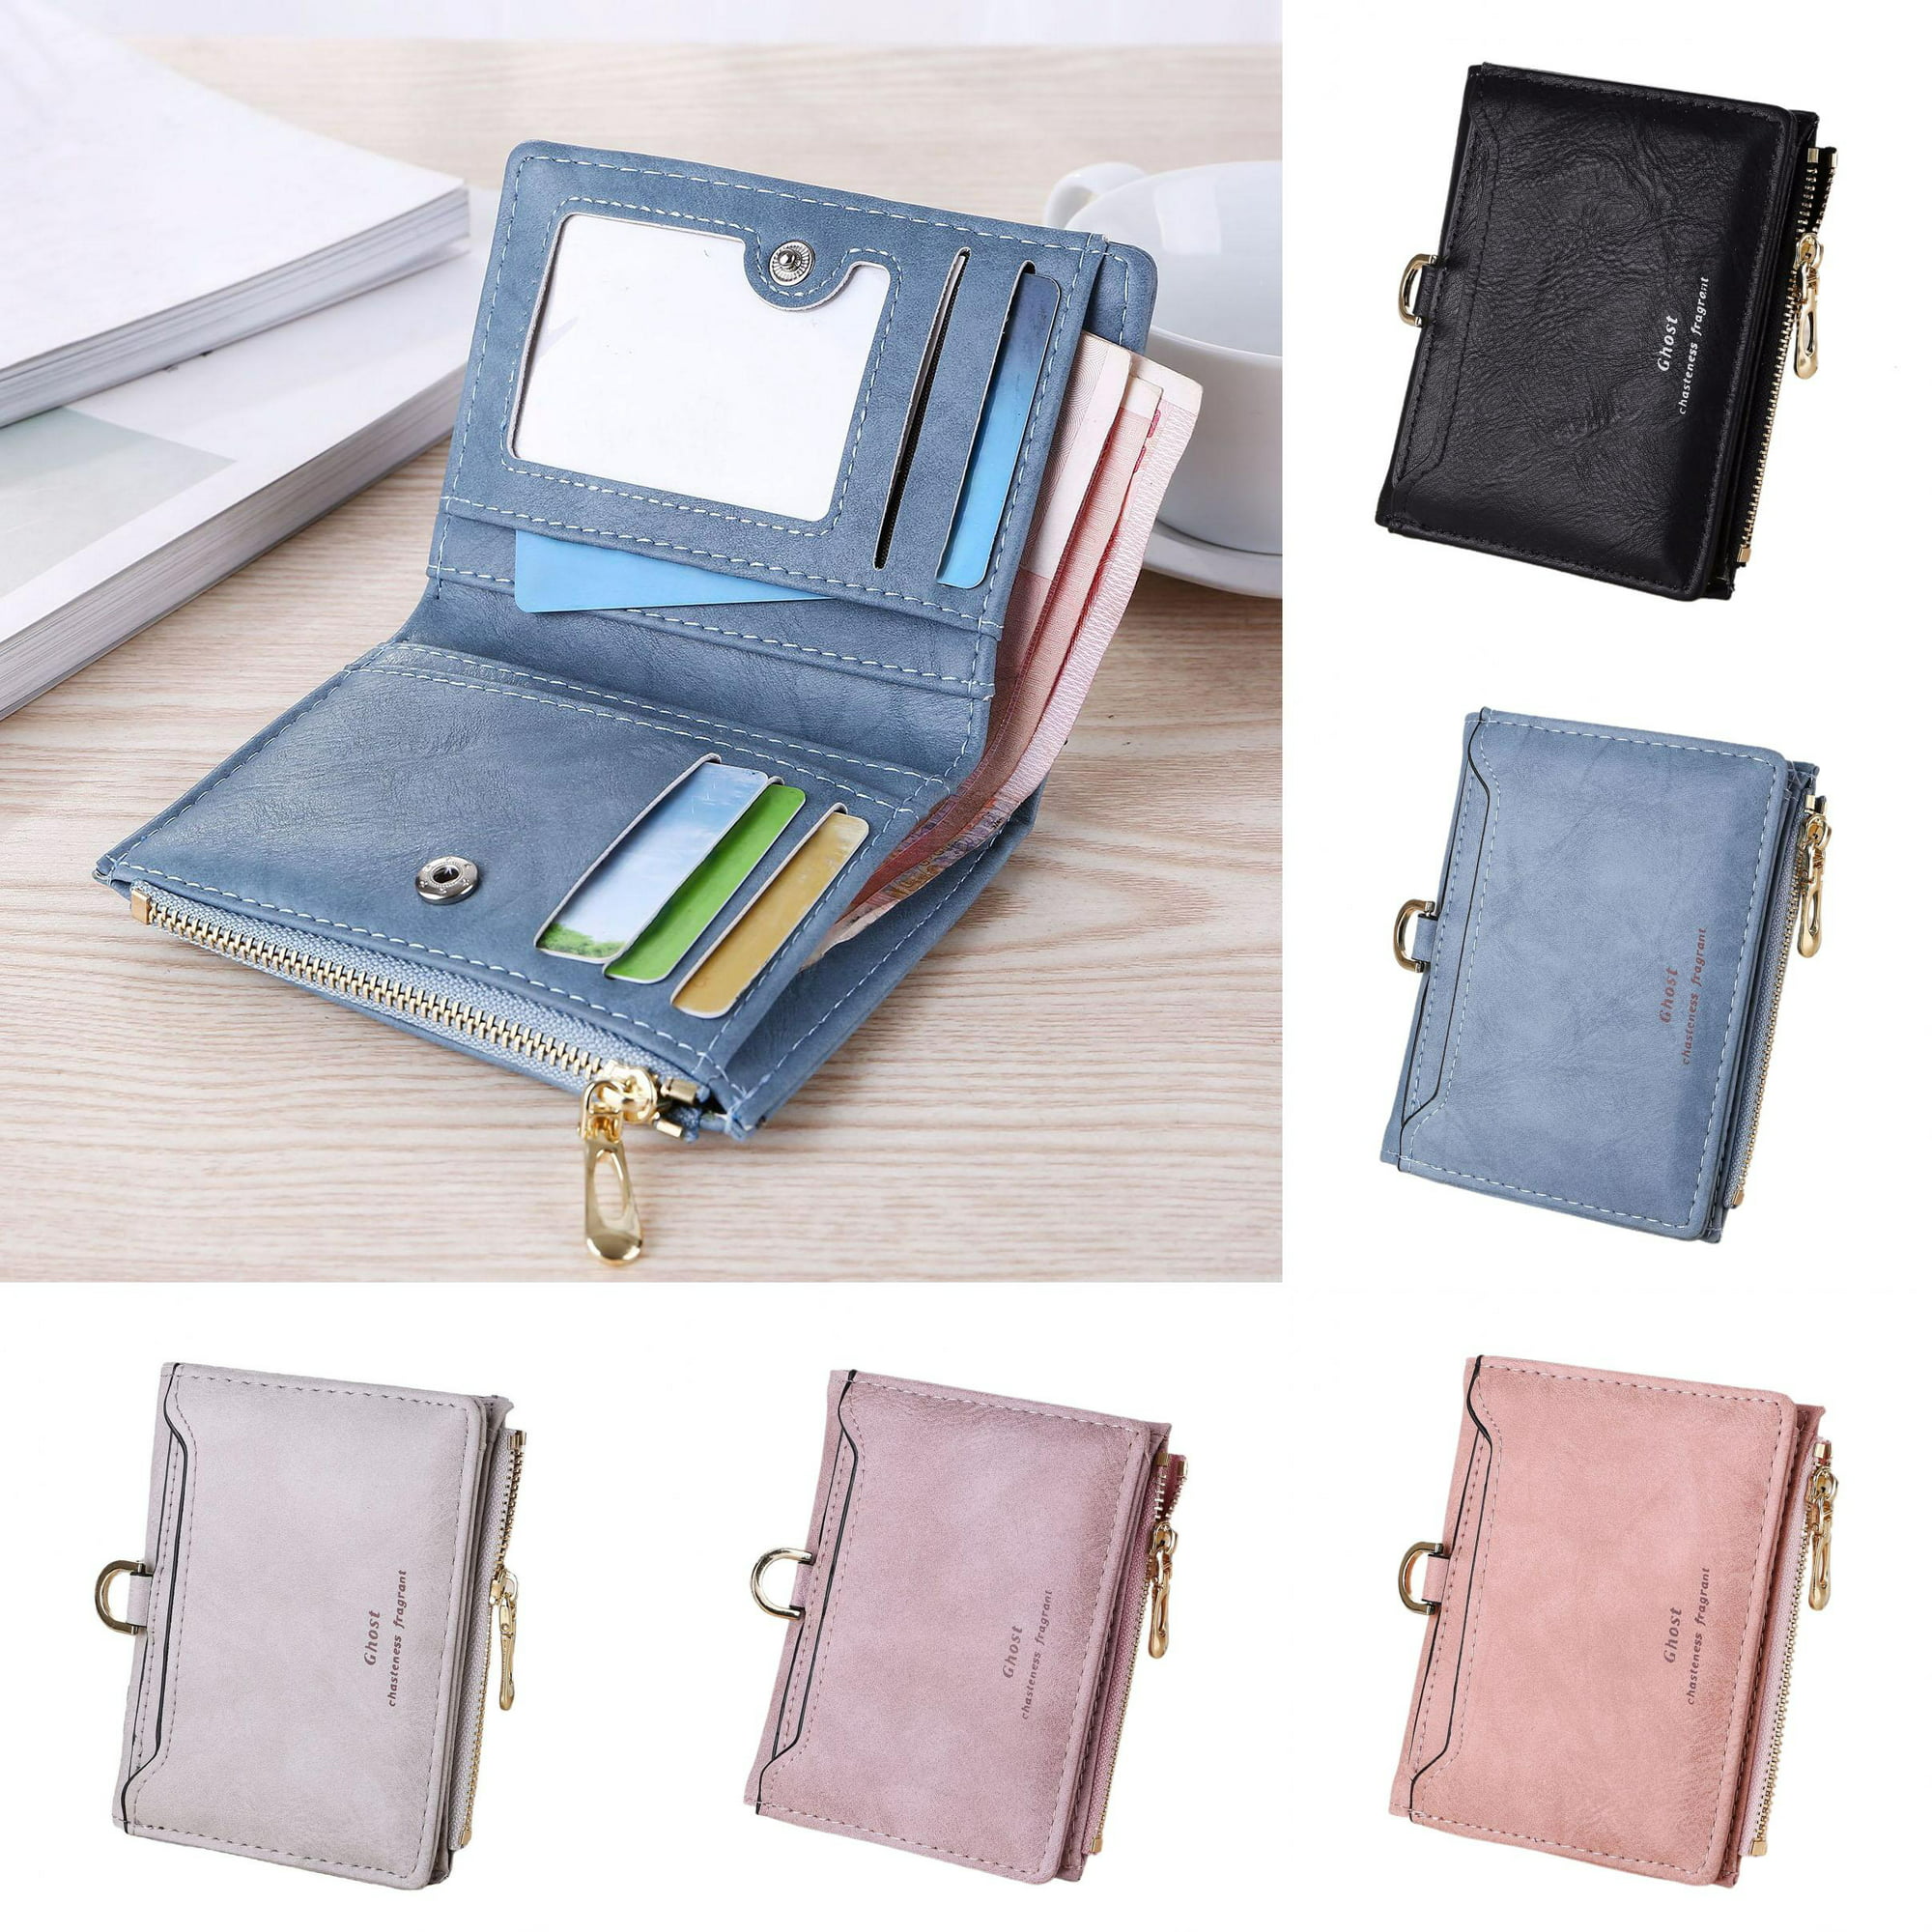 Card Holders and Key Holders - Women